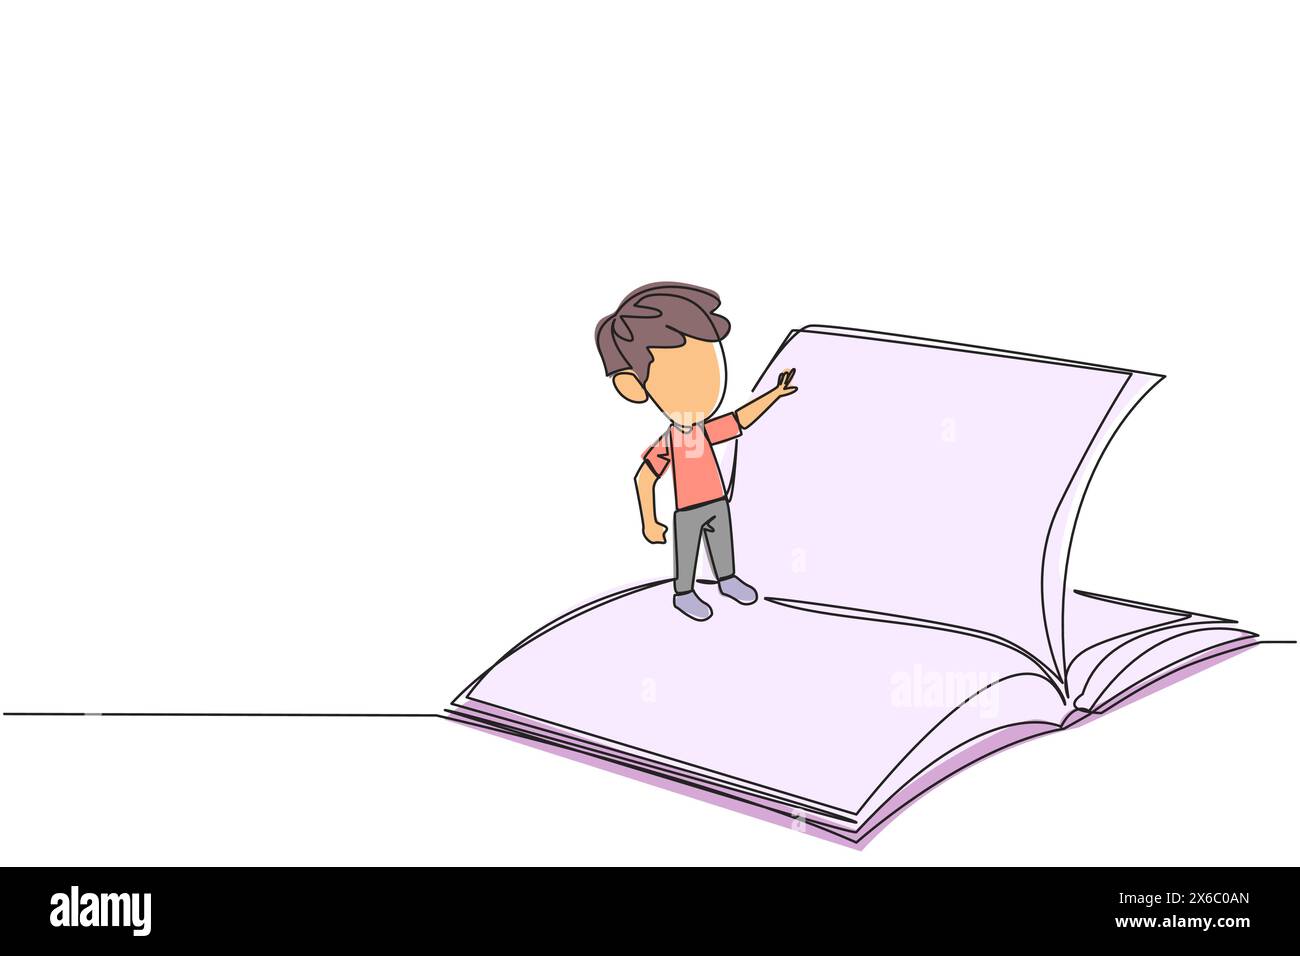 Single one line drawing boy standing over open ledger turning the pages. Read slowly to understand the contents of each page. Reading increases insigh Stock Vector